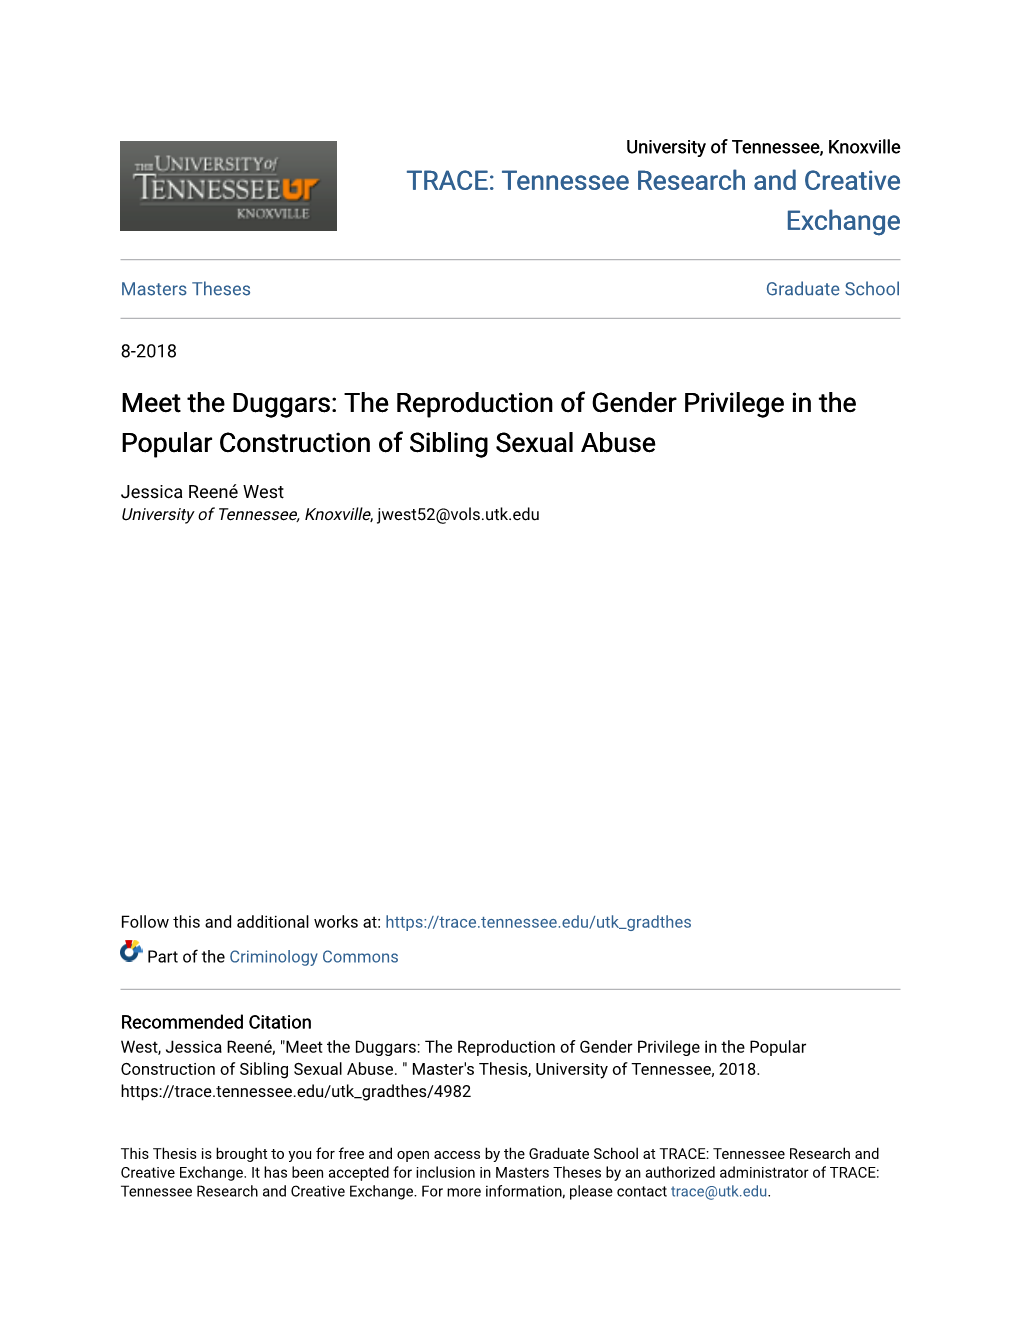 The Reproduction of Gender Privilege in the Popular Construction of Sibling Sexual Abuse